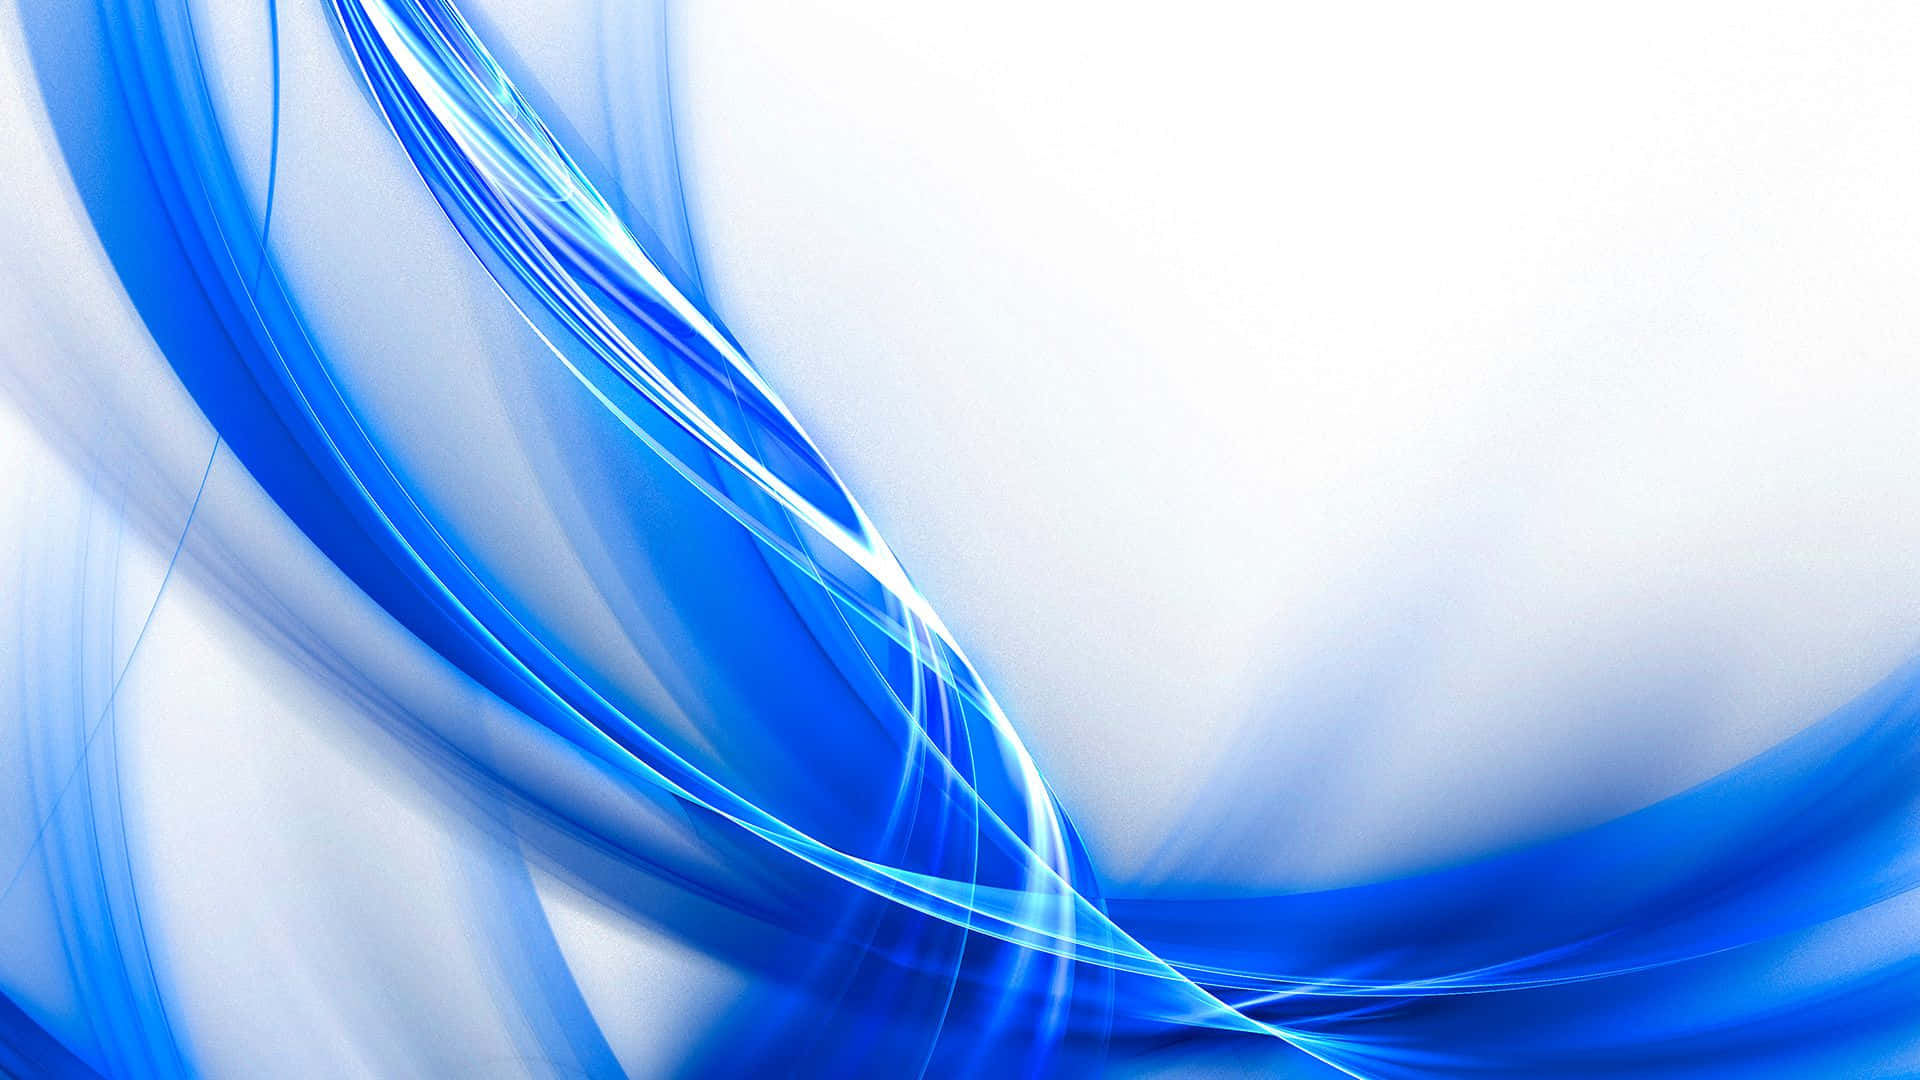 https://wallpapers.com/images/hd/blue-and-white-background-dfqdrxpq683vvux1.jpg